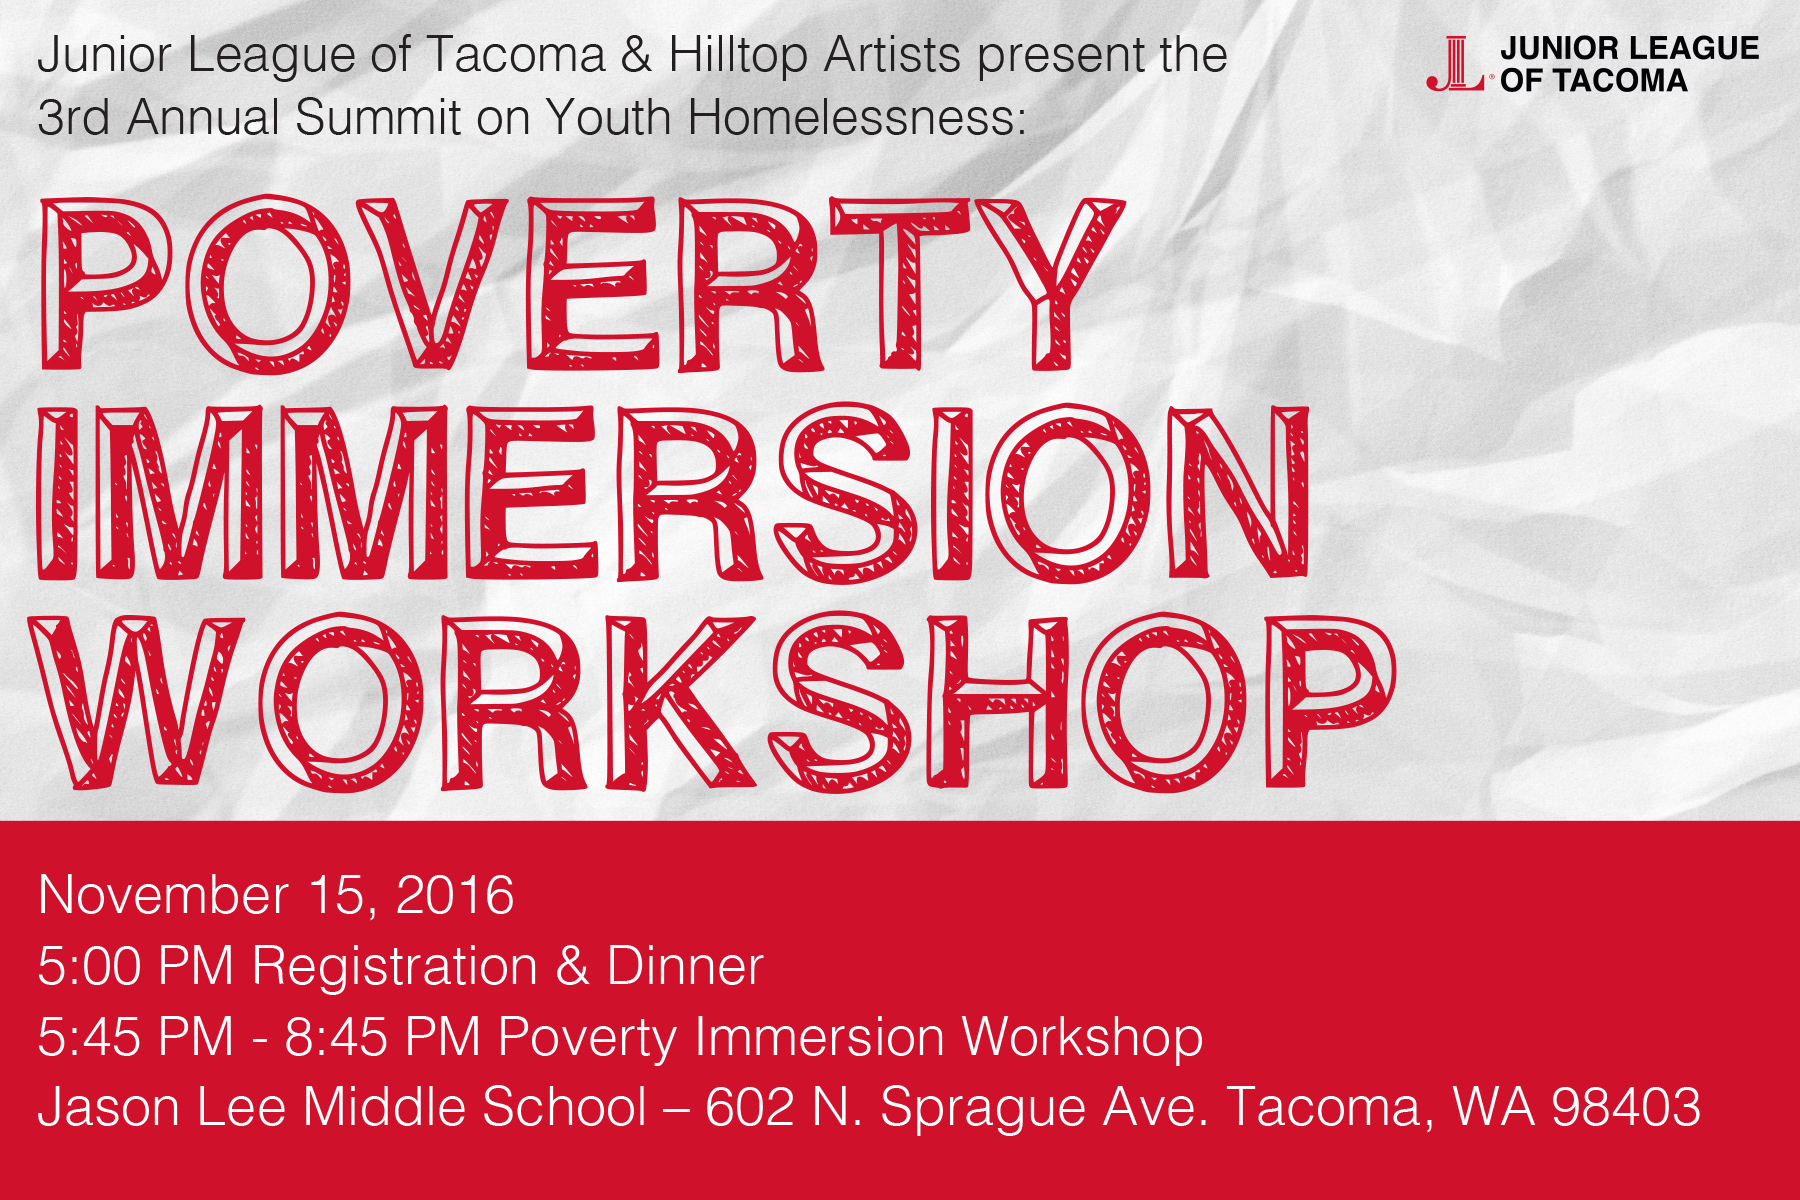 Poverty Immersion Workshop